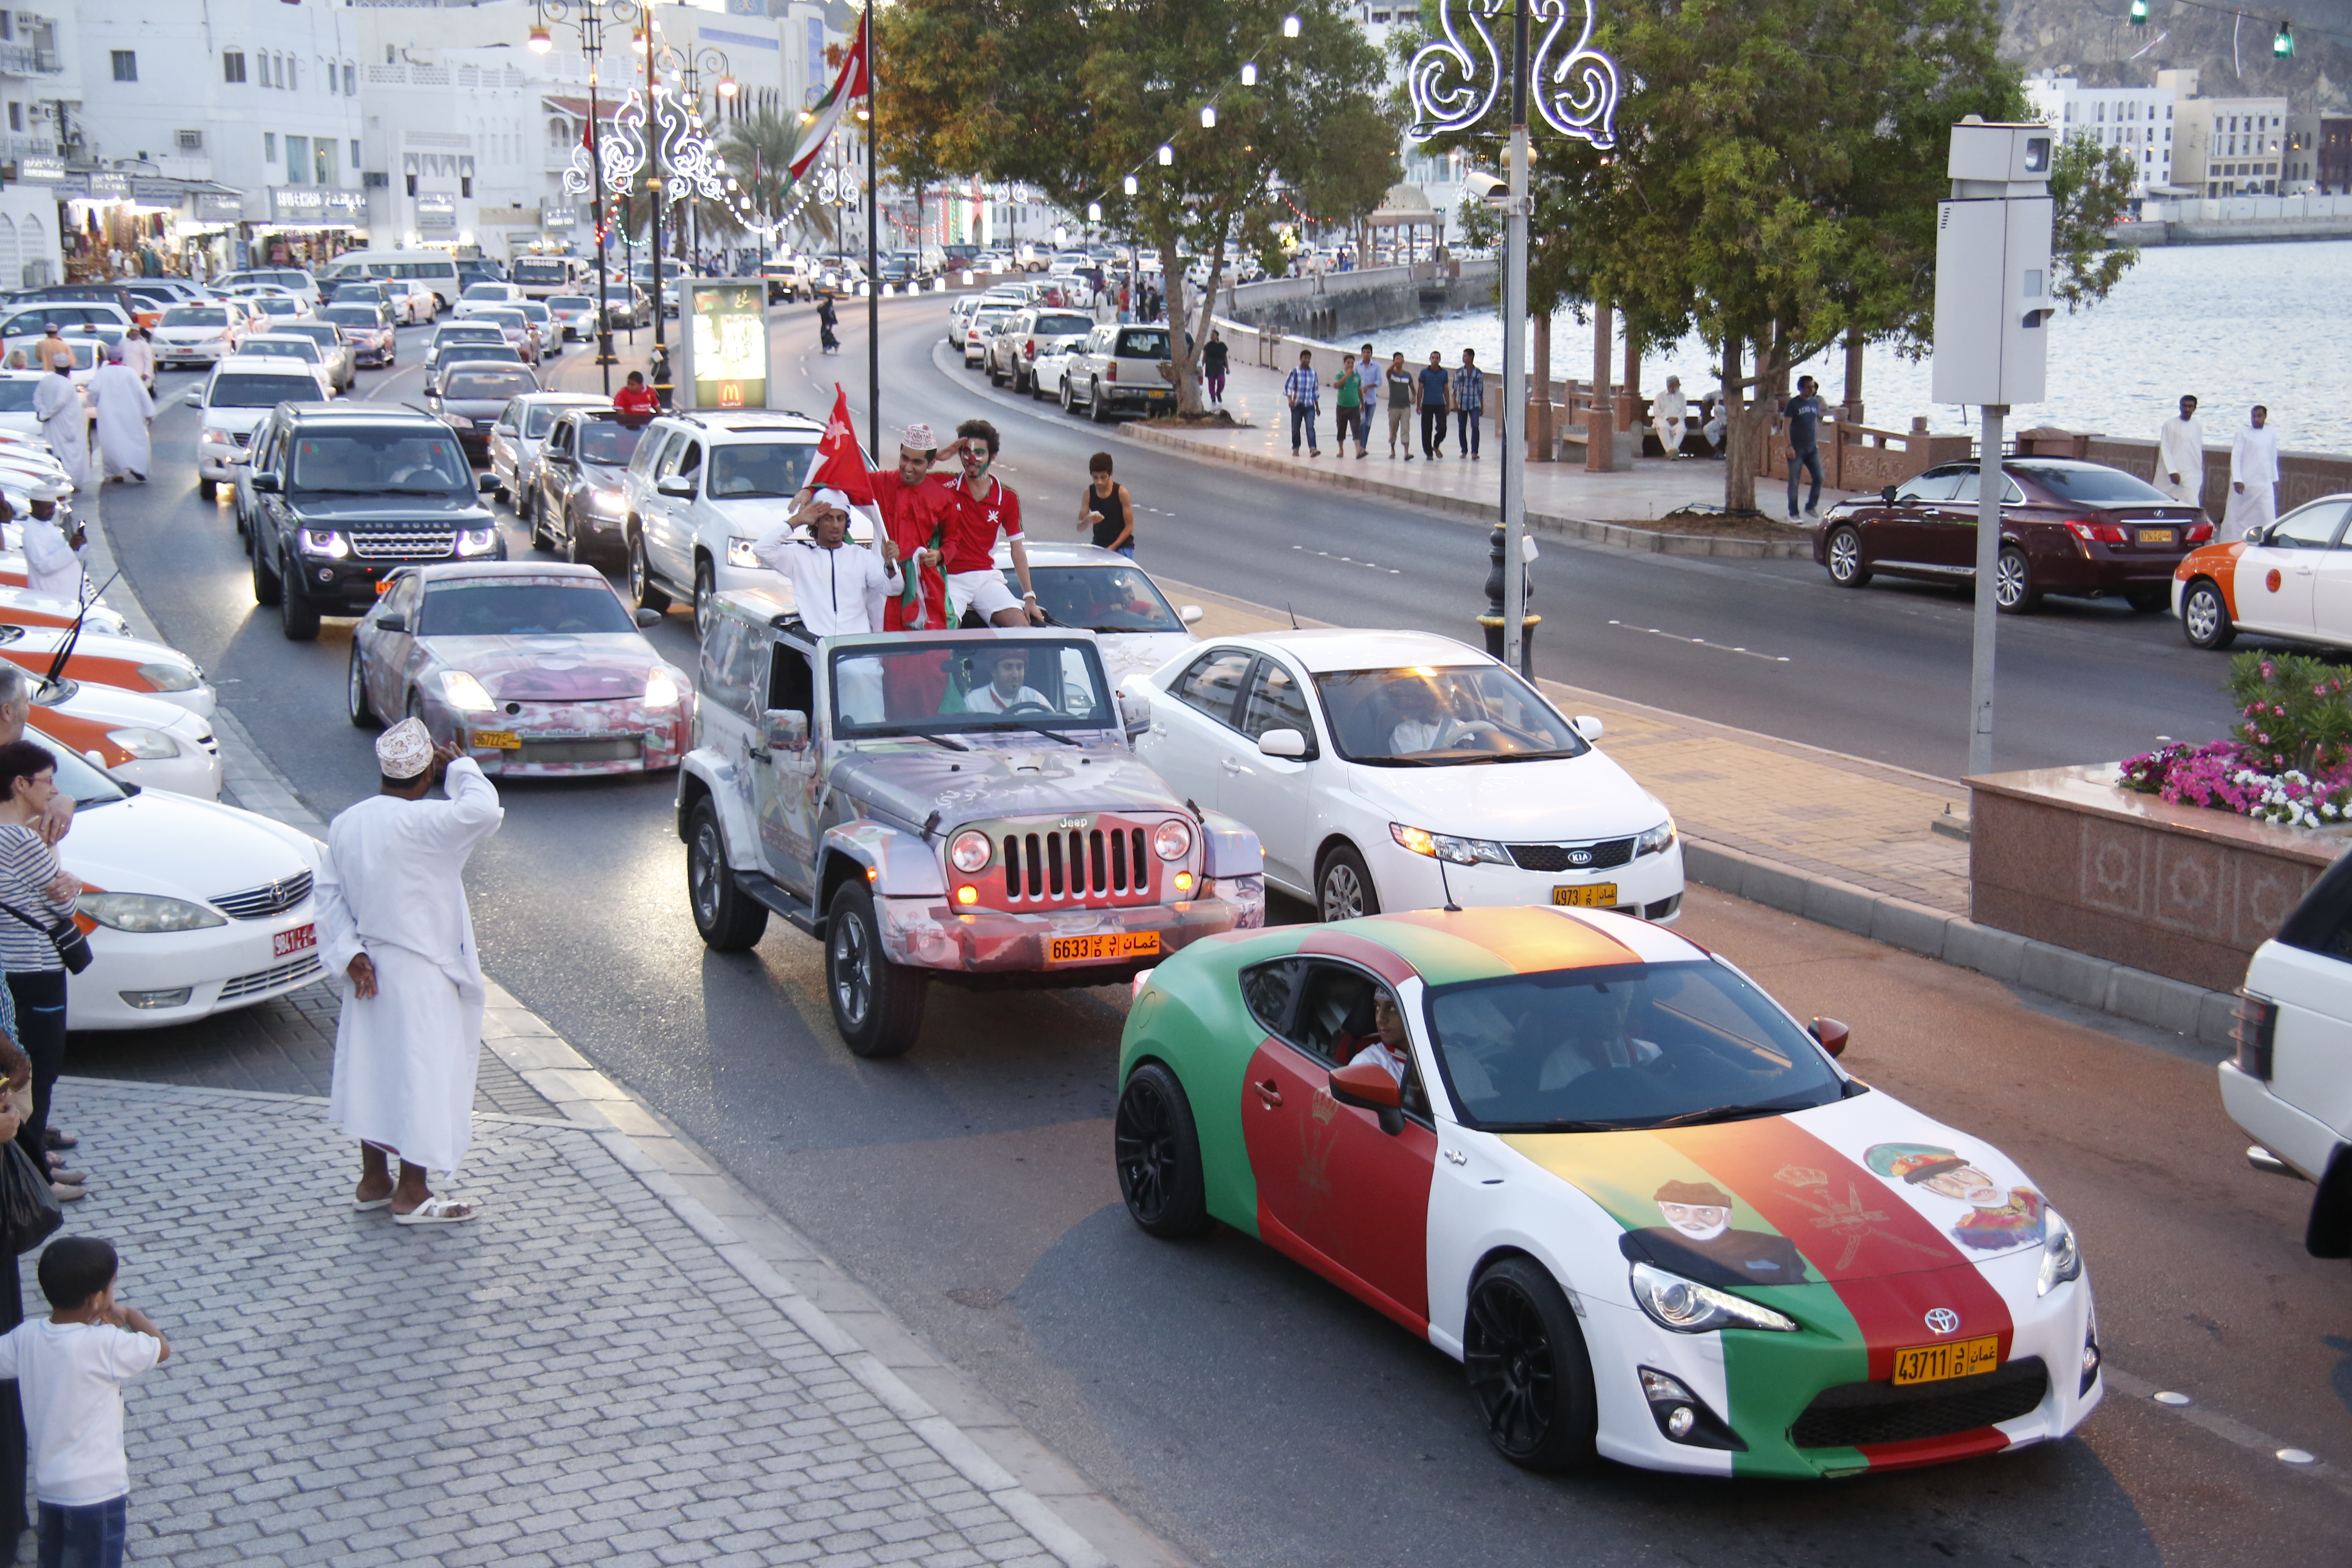 OmanPride: Residents hail His Majesty on 47th National Day